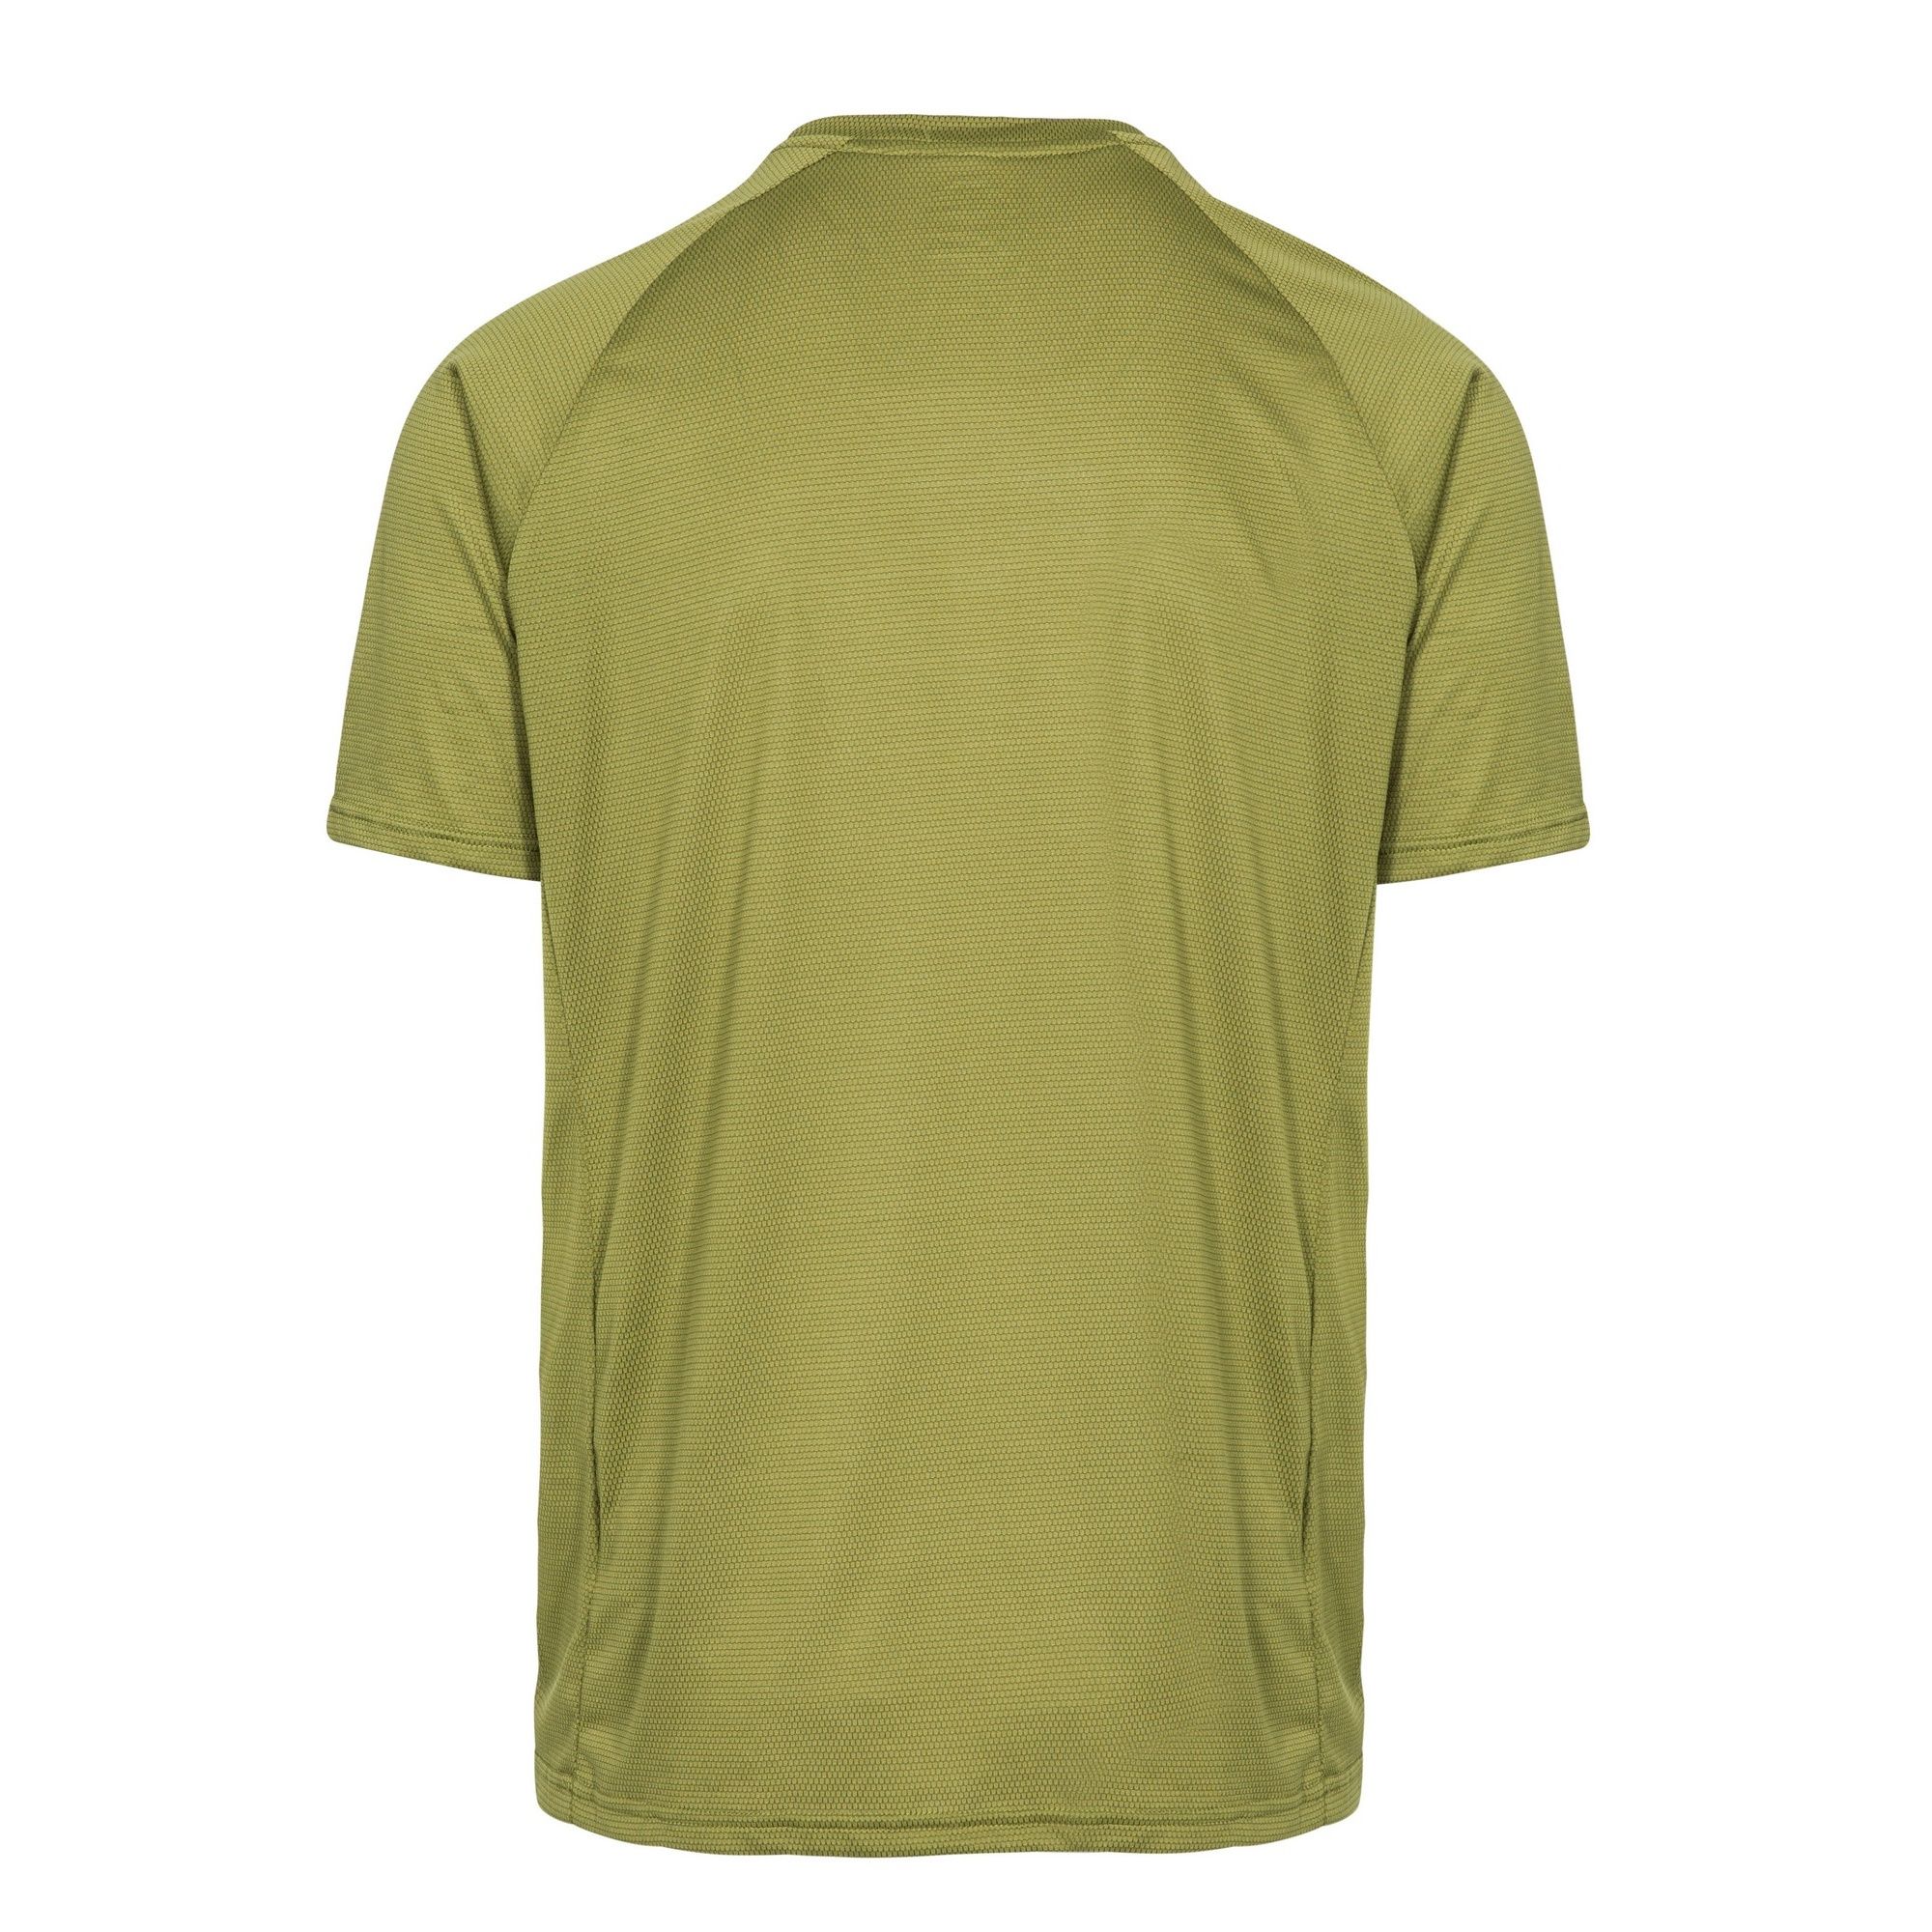 Coverstitch. Contrast binding at inner back neck. Quick dry. 75% Polyester, 25% Bamboo. 90gsm. Trespass Mens Chest Sizing (approx): S - 35-37in/89-94cm, M - 38-40in/96.5-101.5cm, L - 41-43in/104-109cm, XL - 44-46in/111.5-117cm, XXL - 46-48in/117-122cm, 3XL - 48-50in/122-127cm.